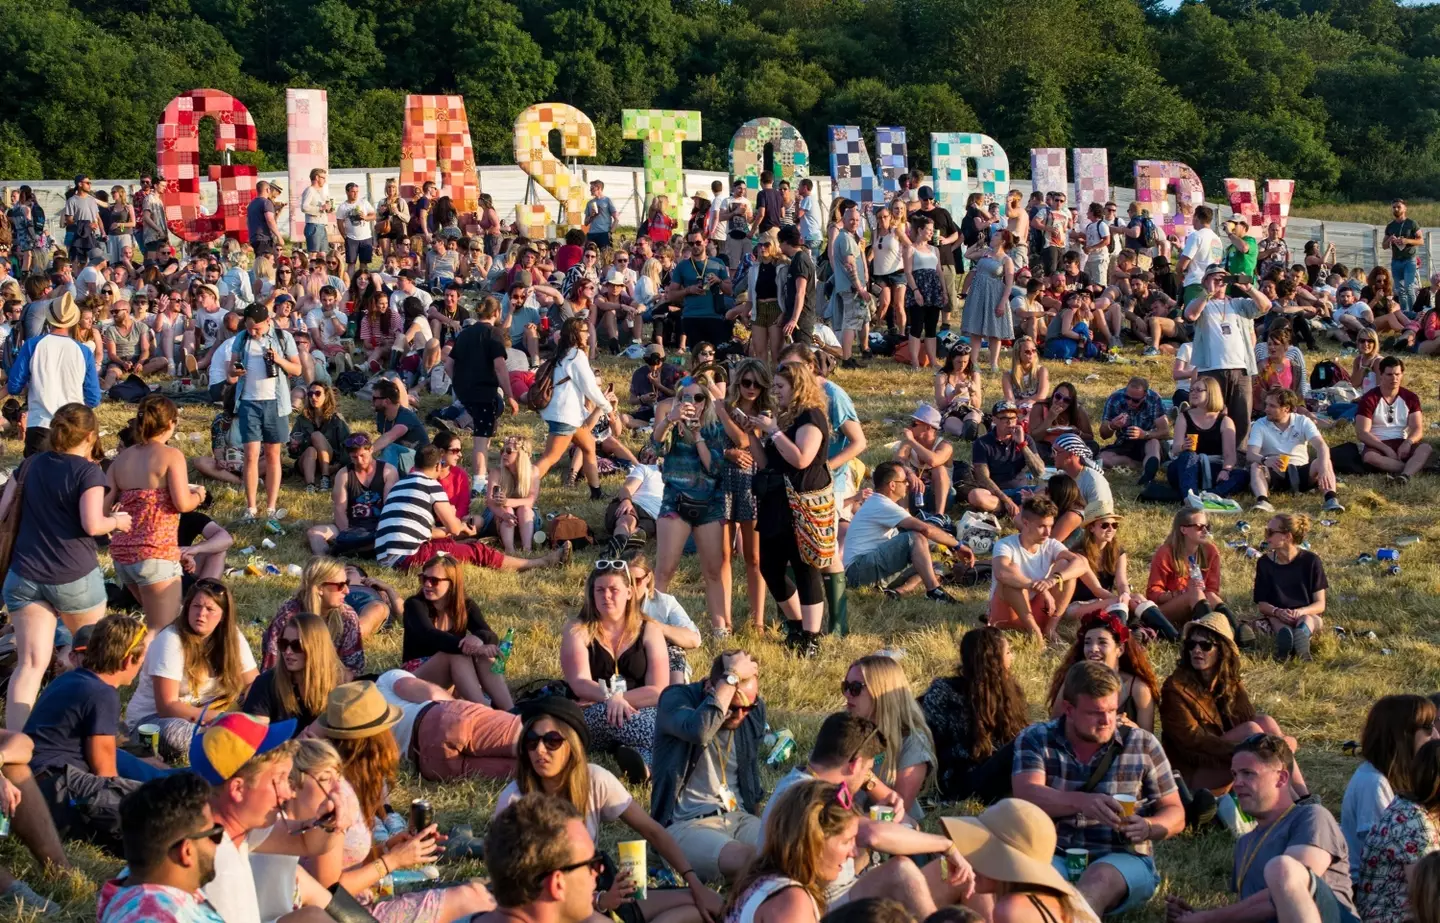 If you sign up to be an Oxfam volunteer for the festival season, you could wind up at some of the biggest events of the summer - all just for a few hours of work.